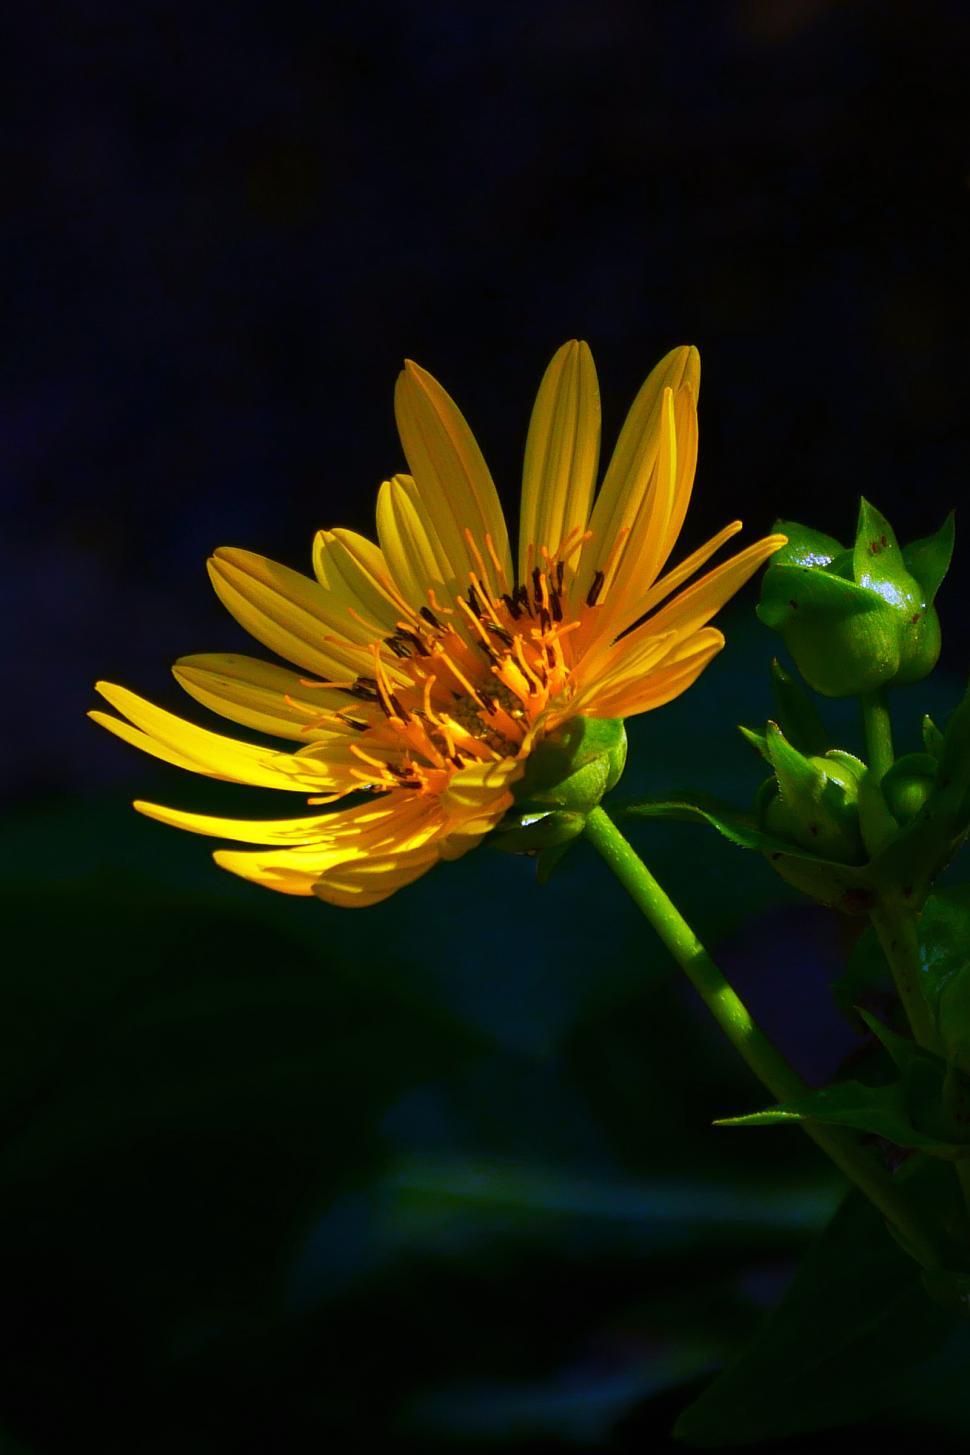 Free Image of Golden Aster Flower, Blooming in Shade 